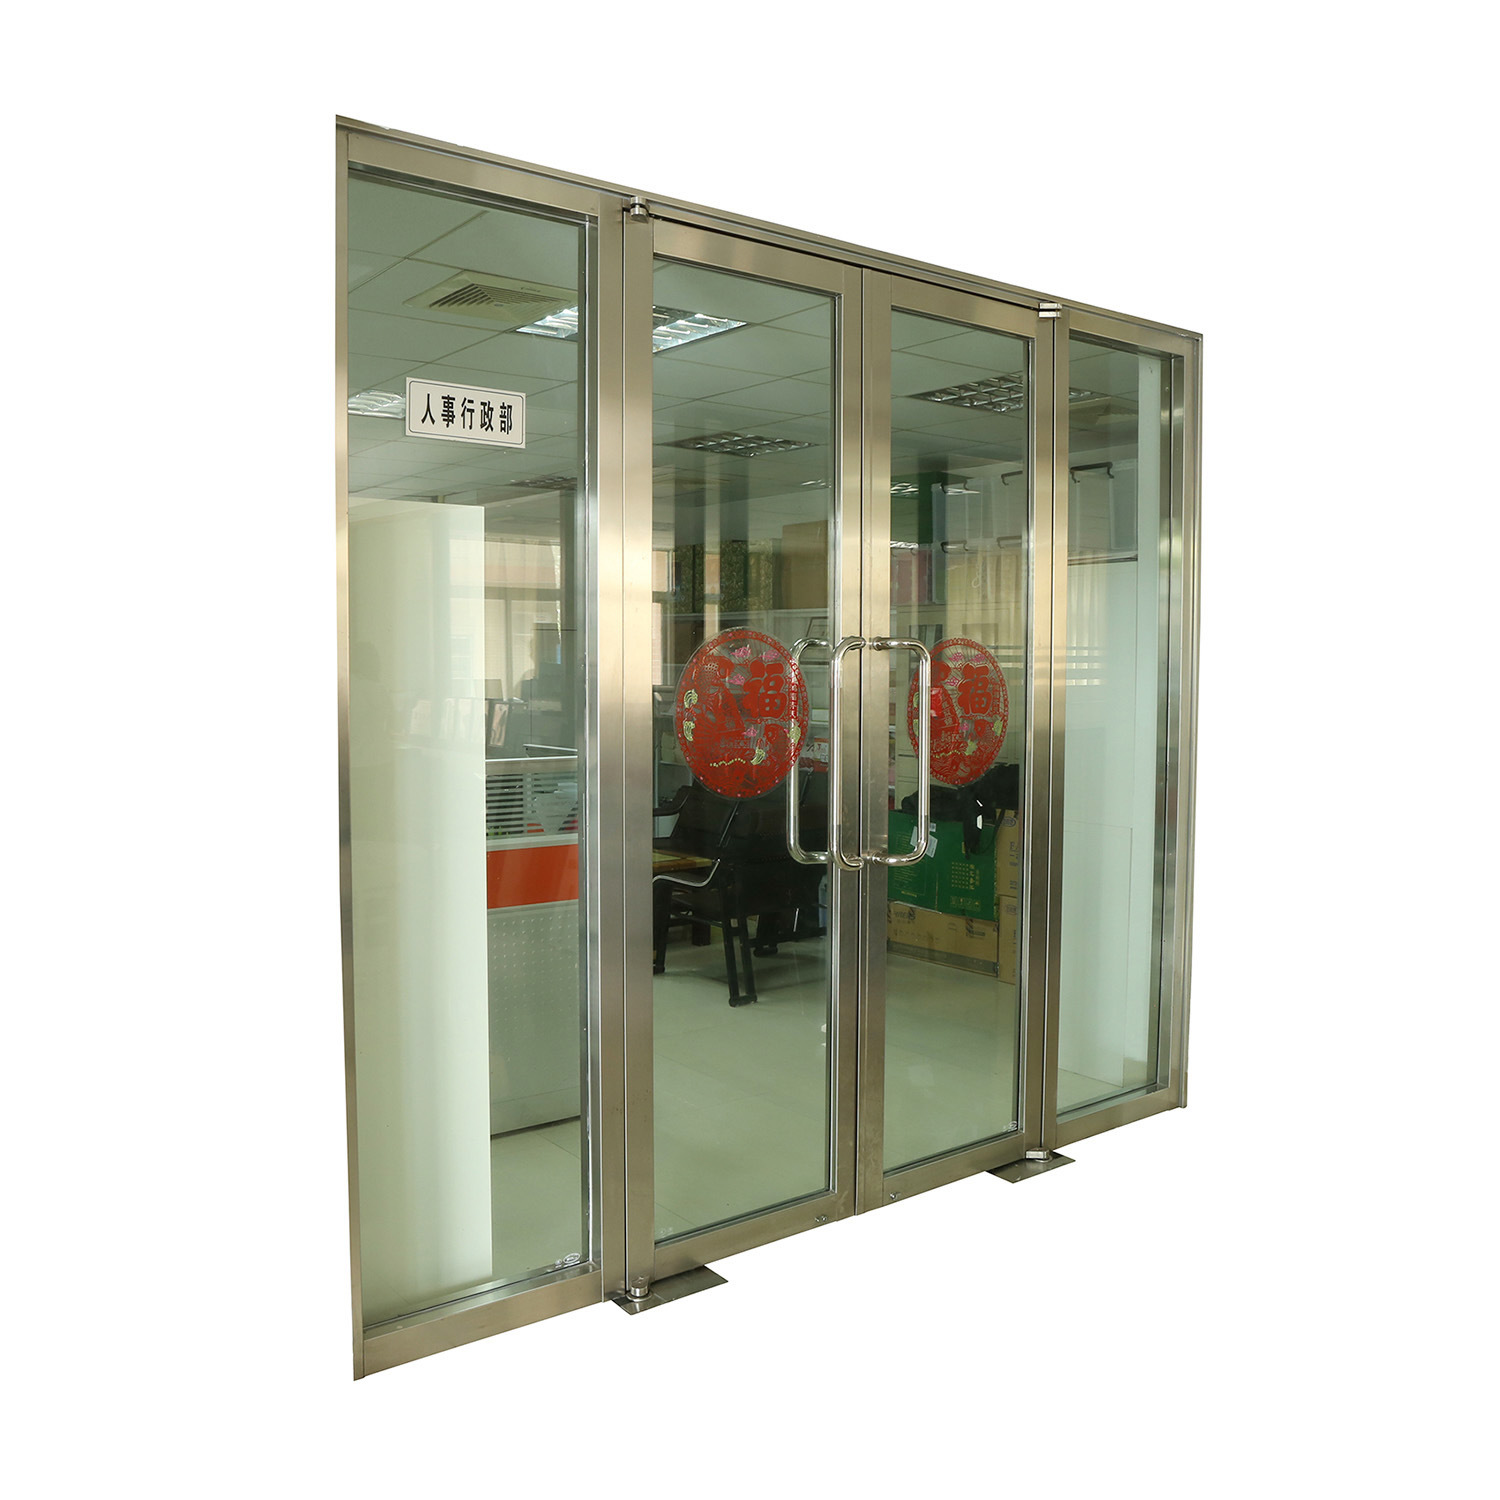 41mm 2.0h Fpos Fire Rated Glass BS En/As1530.4 Interior& Exterior Door